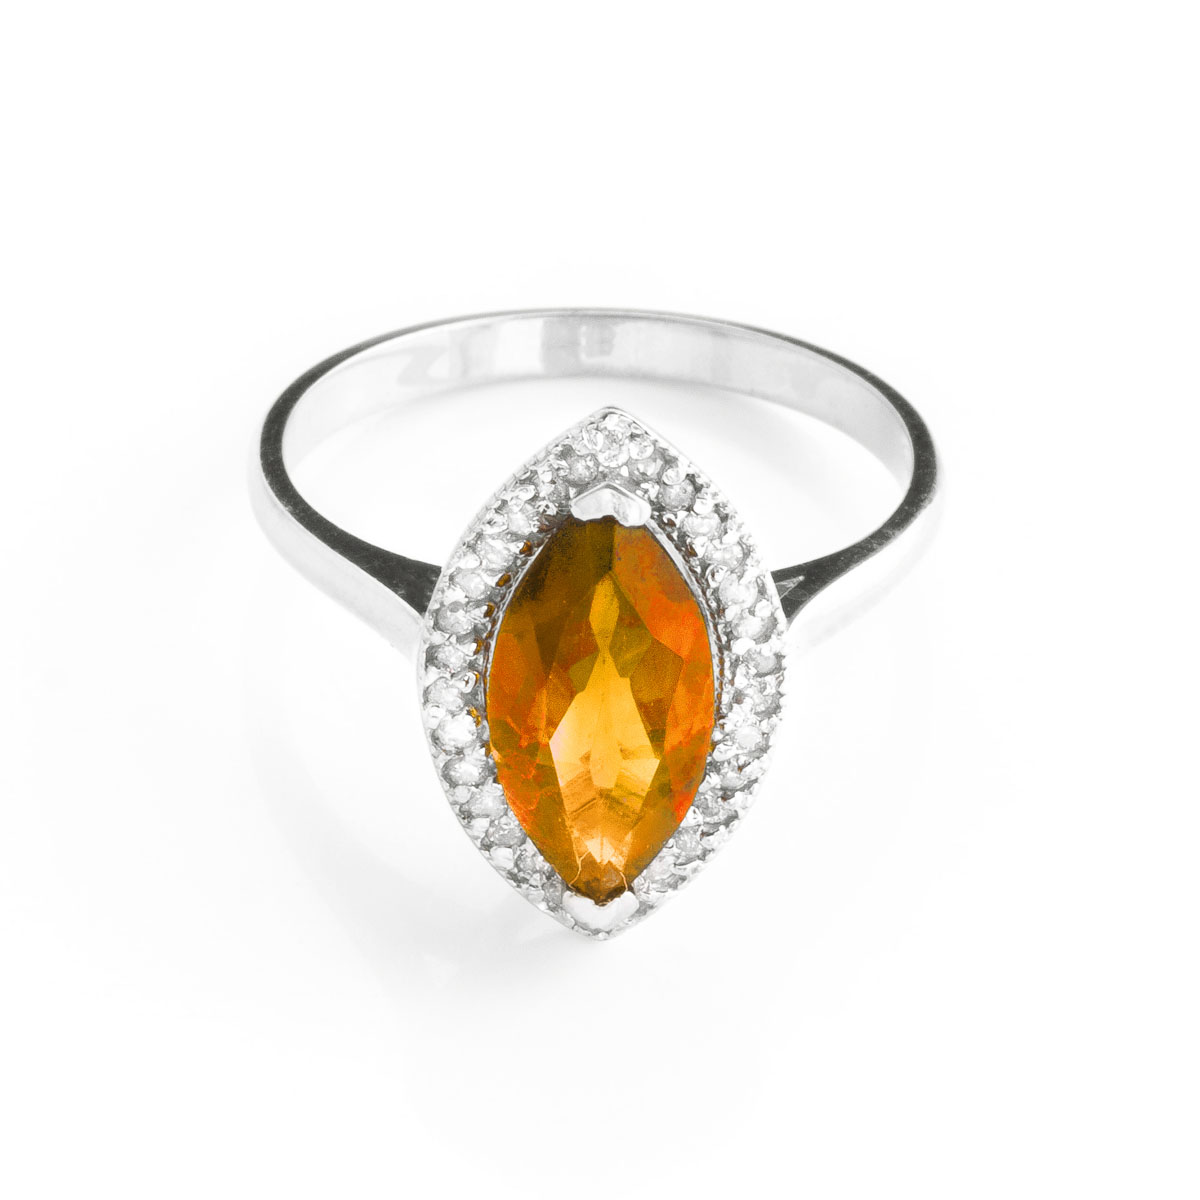 Citrine Halo Ring 1.8 ctw in 18ct White Gold